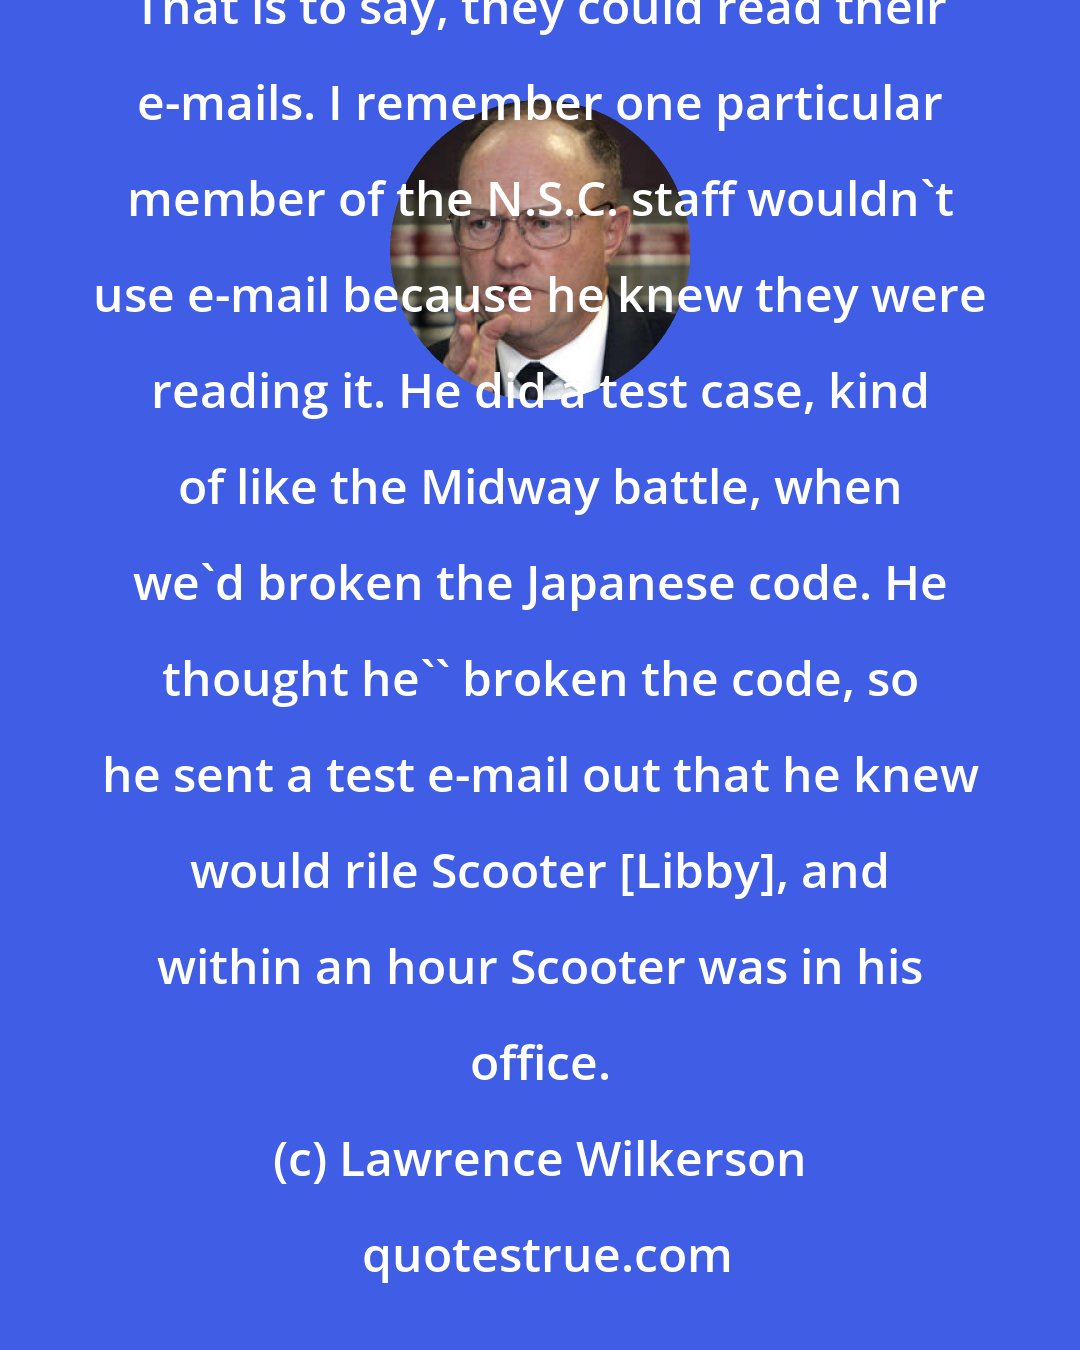 Lawrence Wilkerson: The Cheney team had, for example, technological supremacy over the National Security Council staff. That is to say, they could read their e-mails. I remember one particular member of the N.S.C. staff wouldn't use e-mail because he knew they were reading it. He did a test case, kind of like the Midway battle, when we'd broken the Japanese code. He thought he'' broken the code, so he sent a test e-mail out that he knew would rile Scooter [Libby], and within an hour Scooter was in his office.